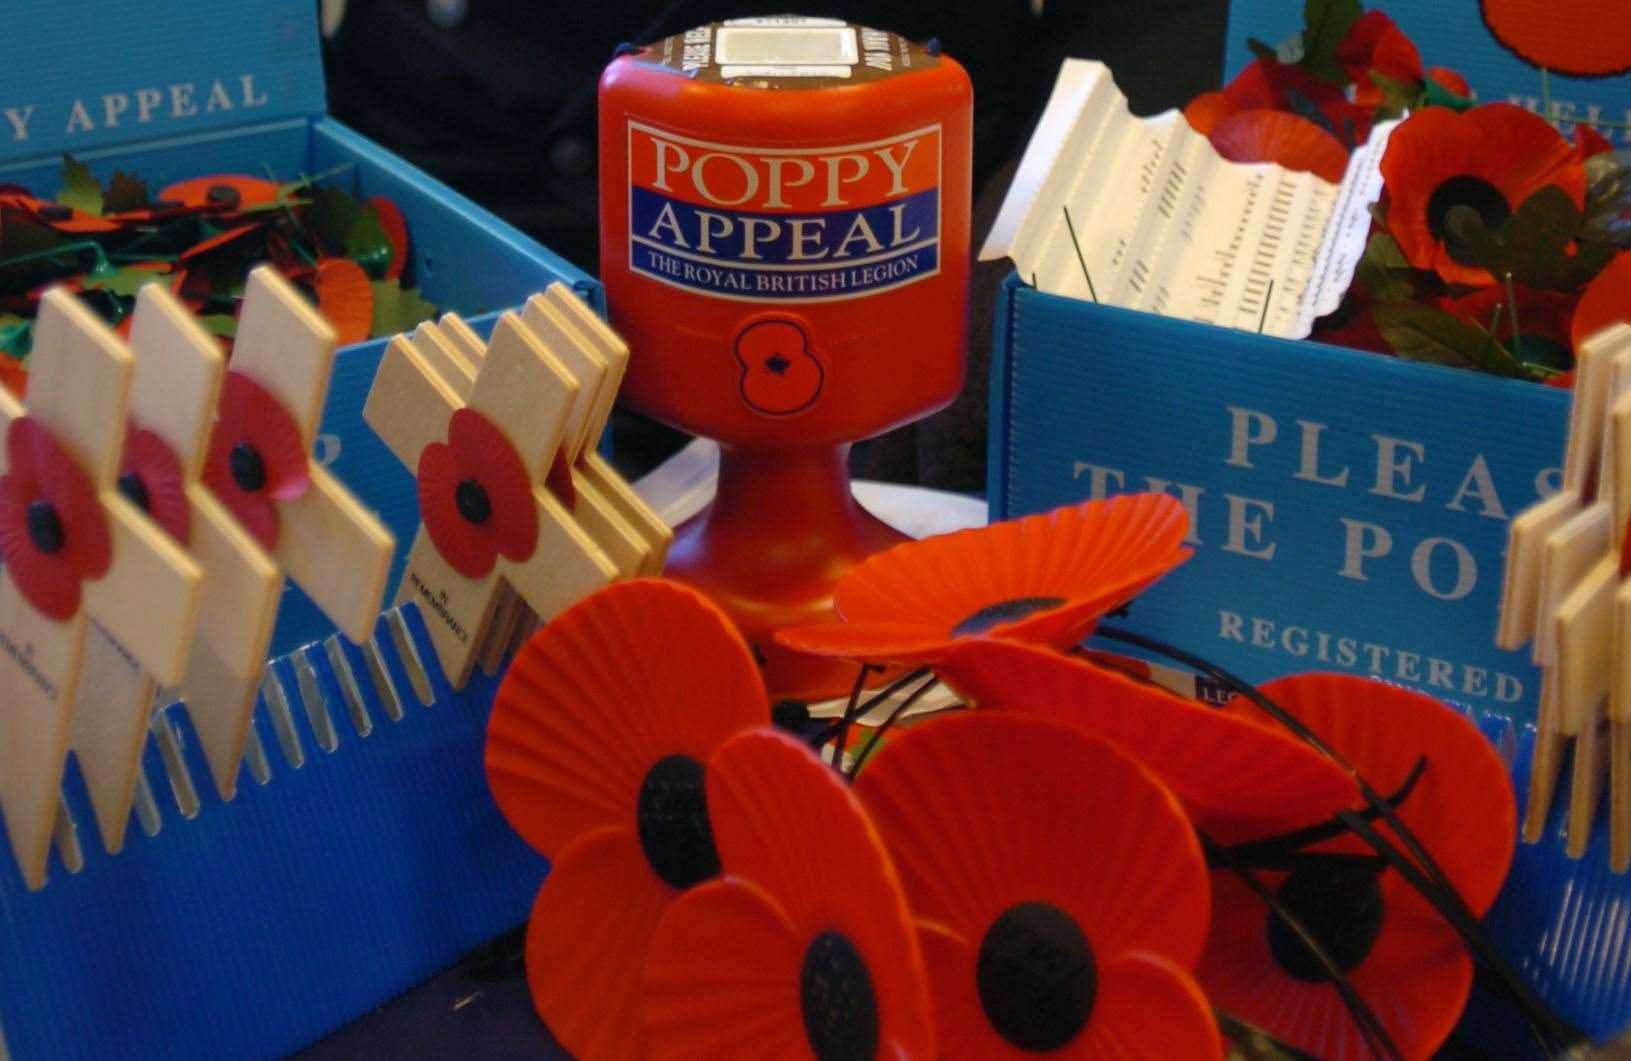 Appeal for residents to help run poppy stalls in Farnworth